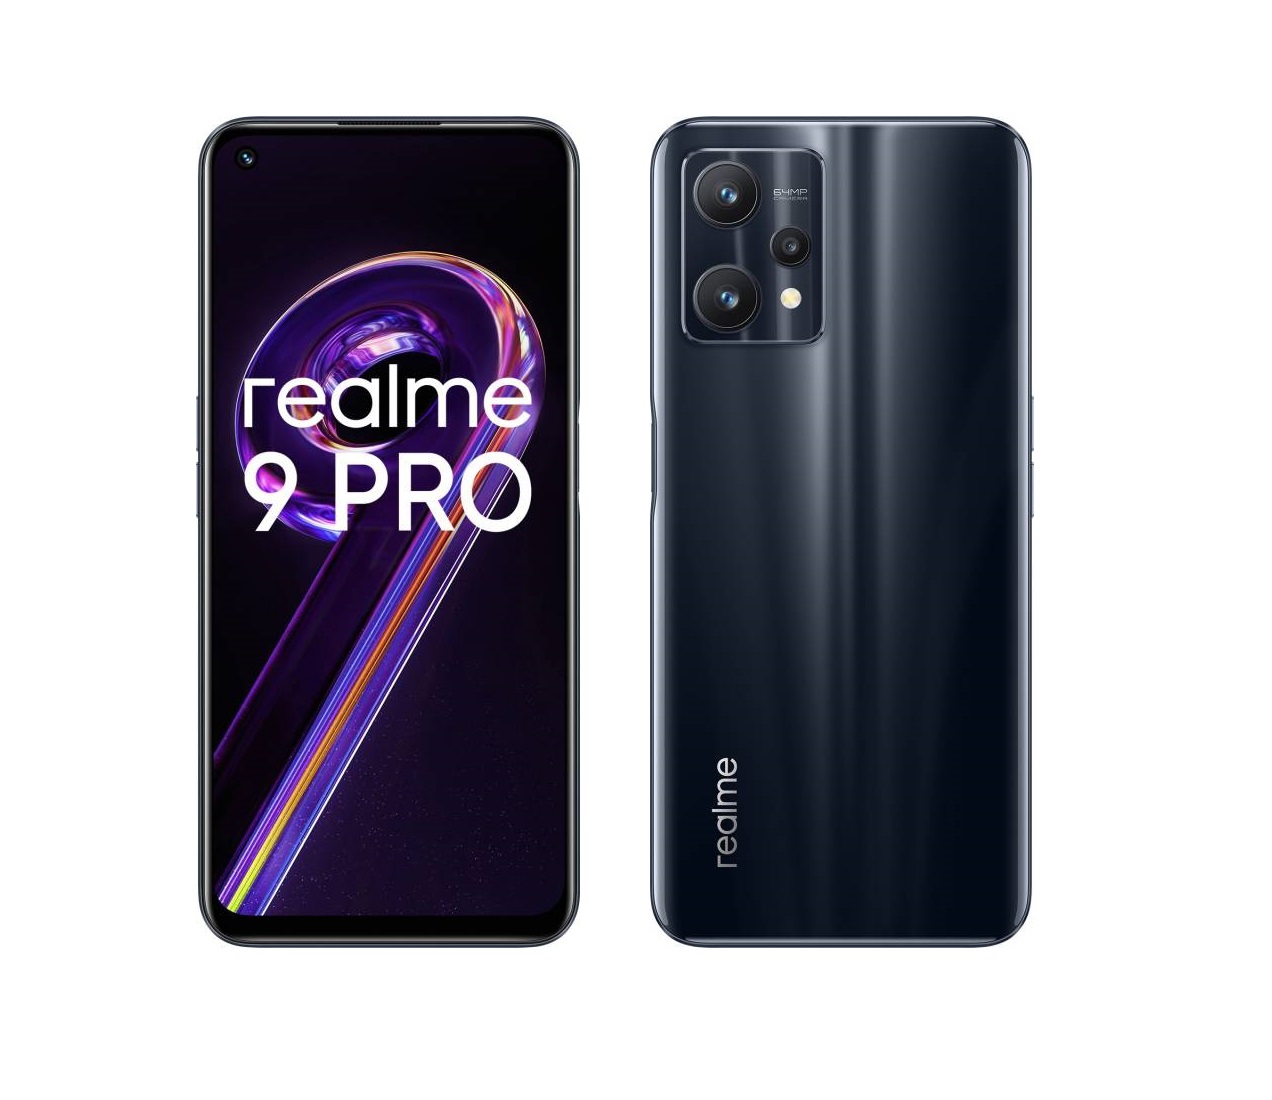 Realme 9 Pro 5G Smartphone with 6GB/8GB RAM, 128GB Internal Memory and 5G Connectivity